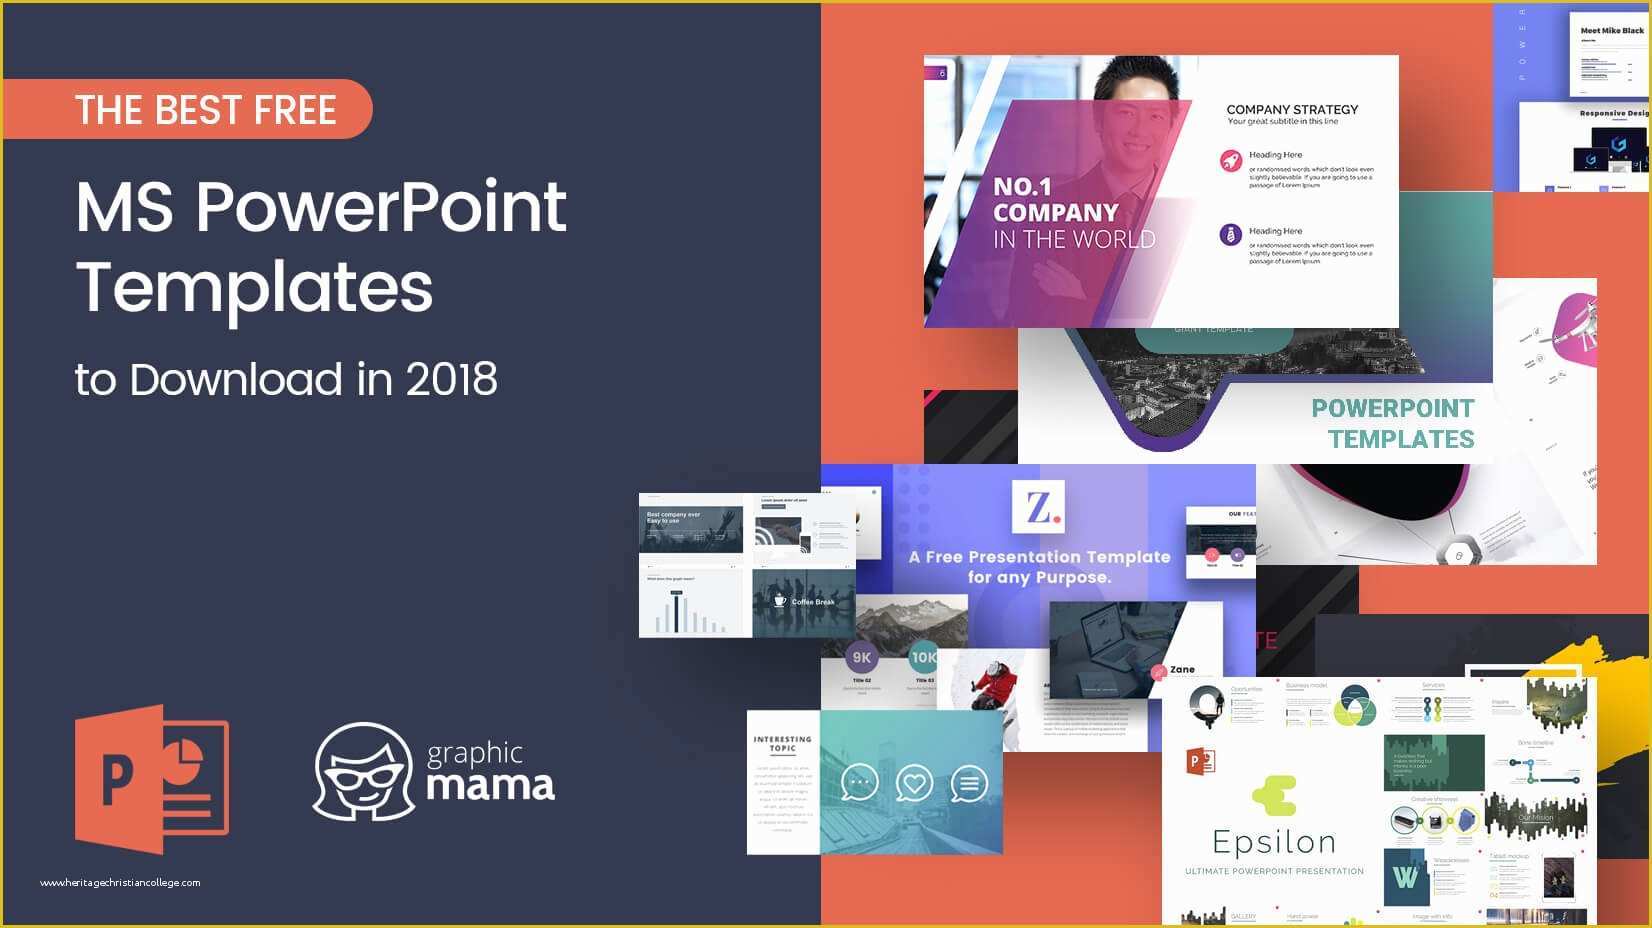 Free Powerpoint Templates 2018 Of the Best Free Powerpoint Templates to Download In 2018